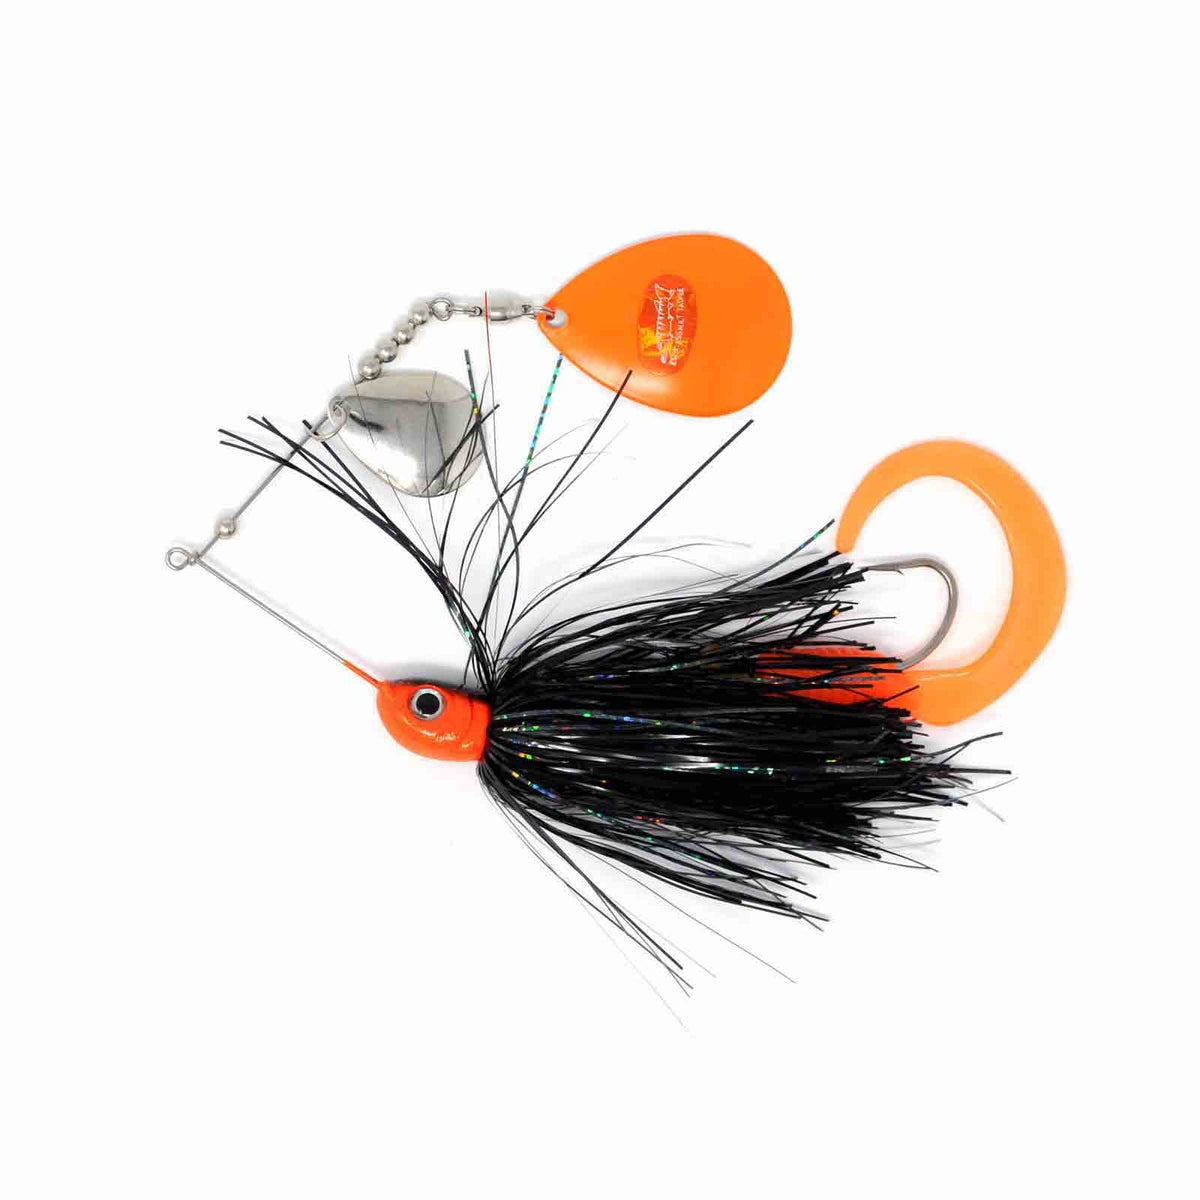 View of Spinnerbaits Esox Assault Spinnerbait Colorado 1oz Black / Orange available at EZOKO Pike and Musky Shop